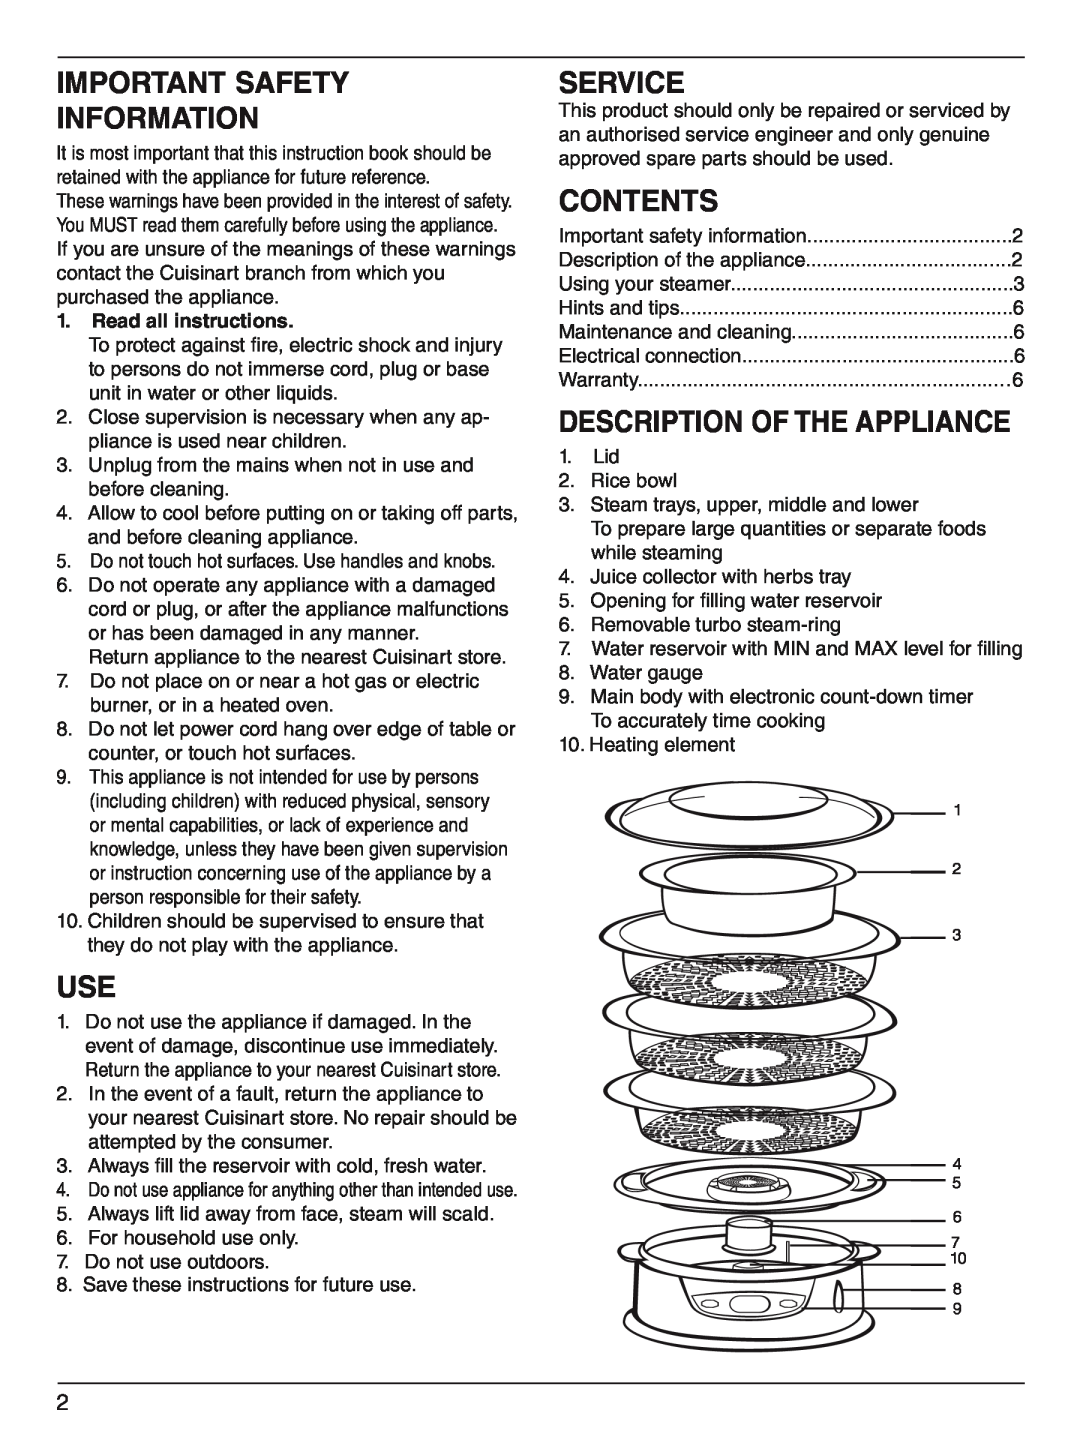 Cuisinart FP-2207A Important safety information, Service, Contents, Description of the appliance, Read all instructions 